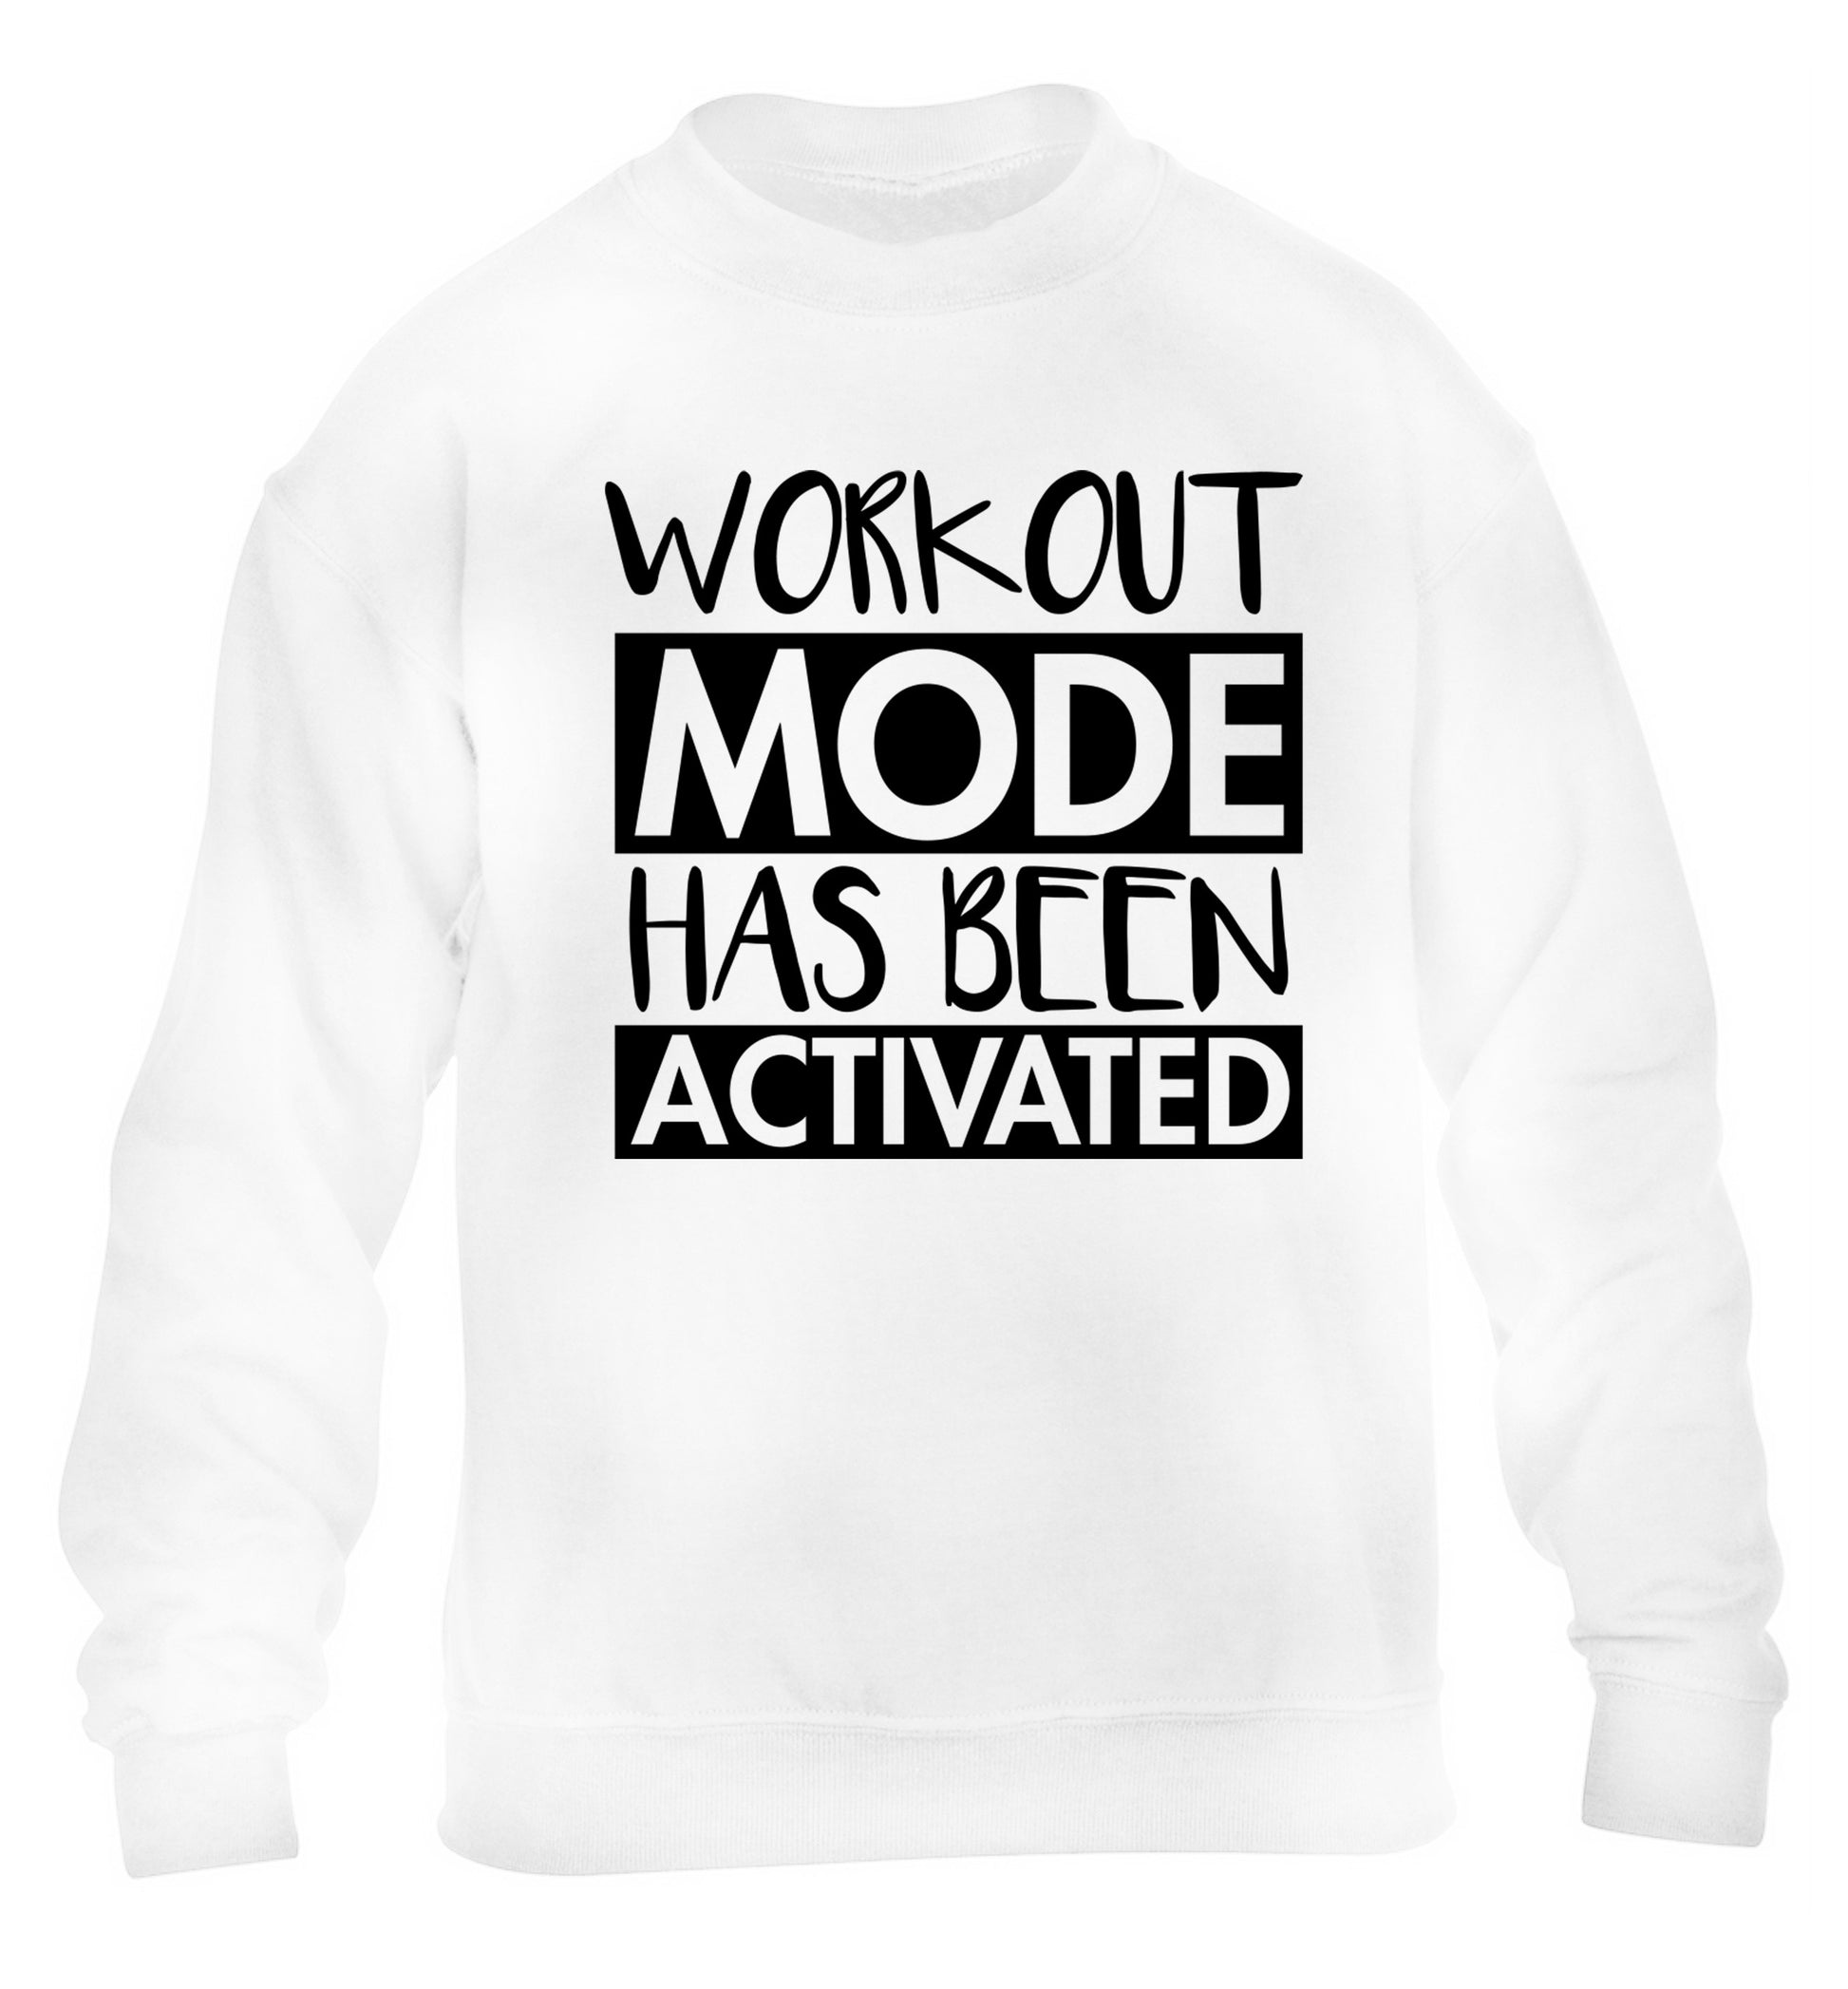 Workout mode has been activated children's white sweater 12-14 Years